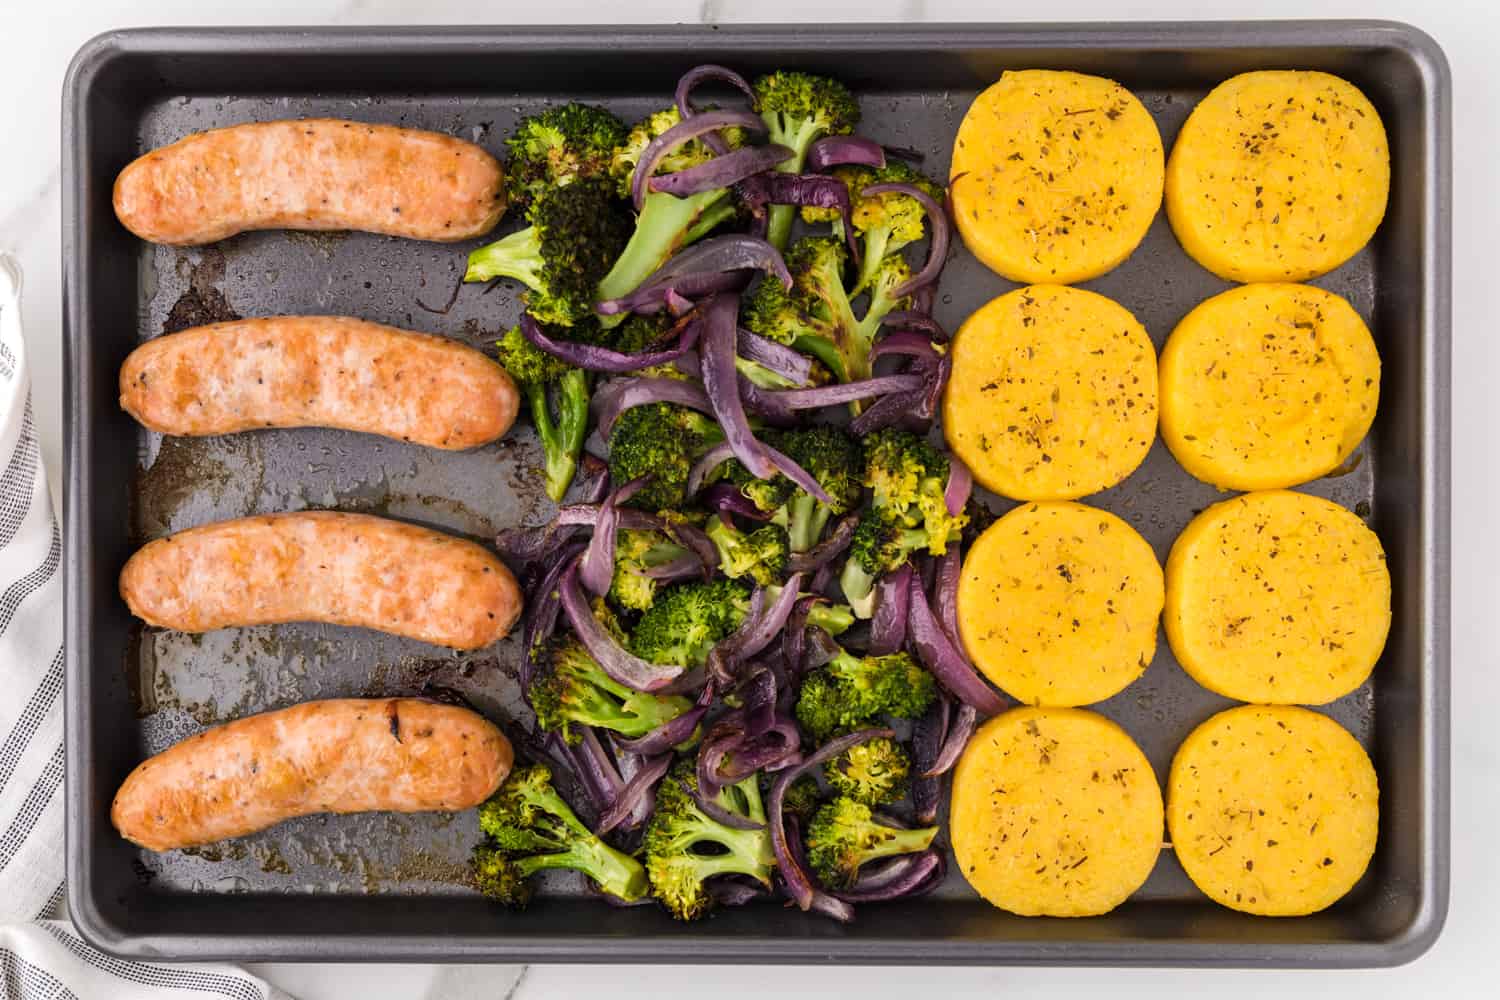 Completed cooked sheet pan dinner.